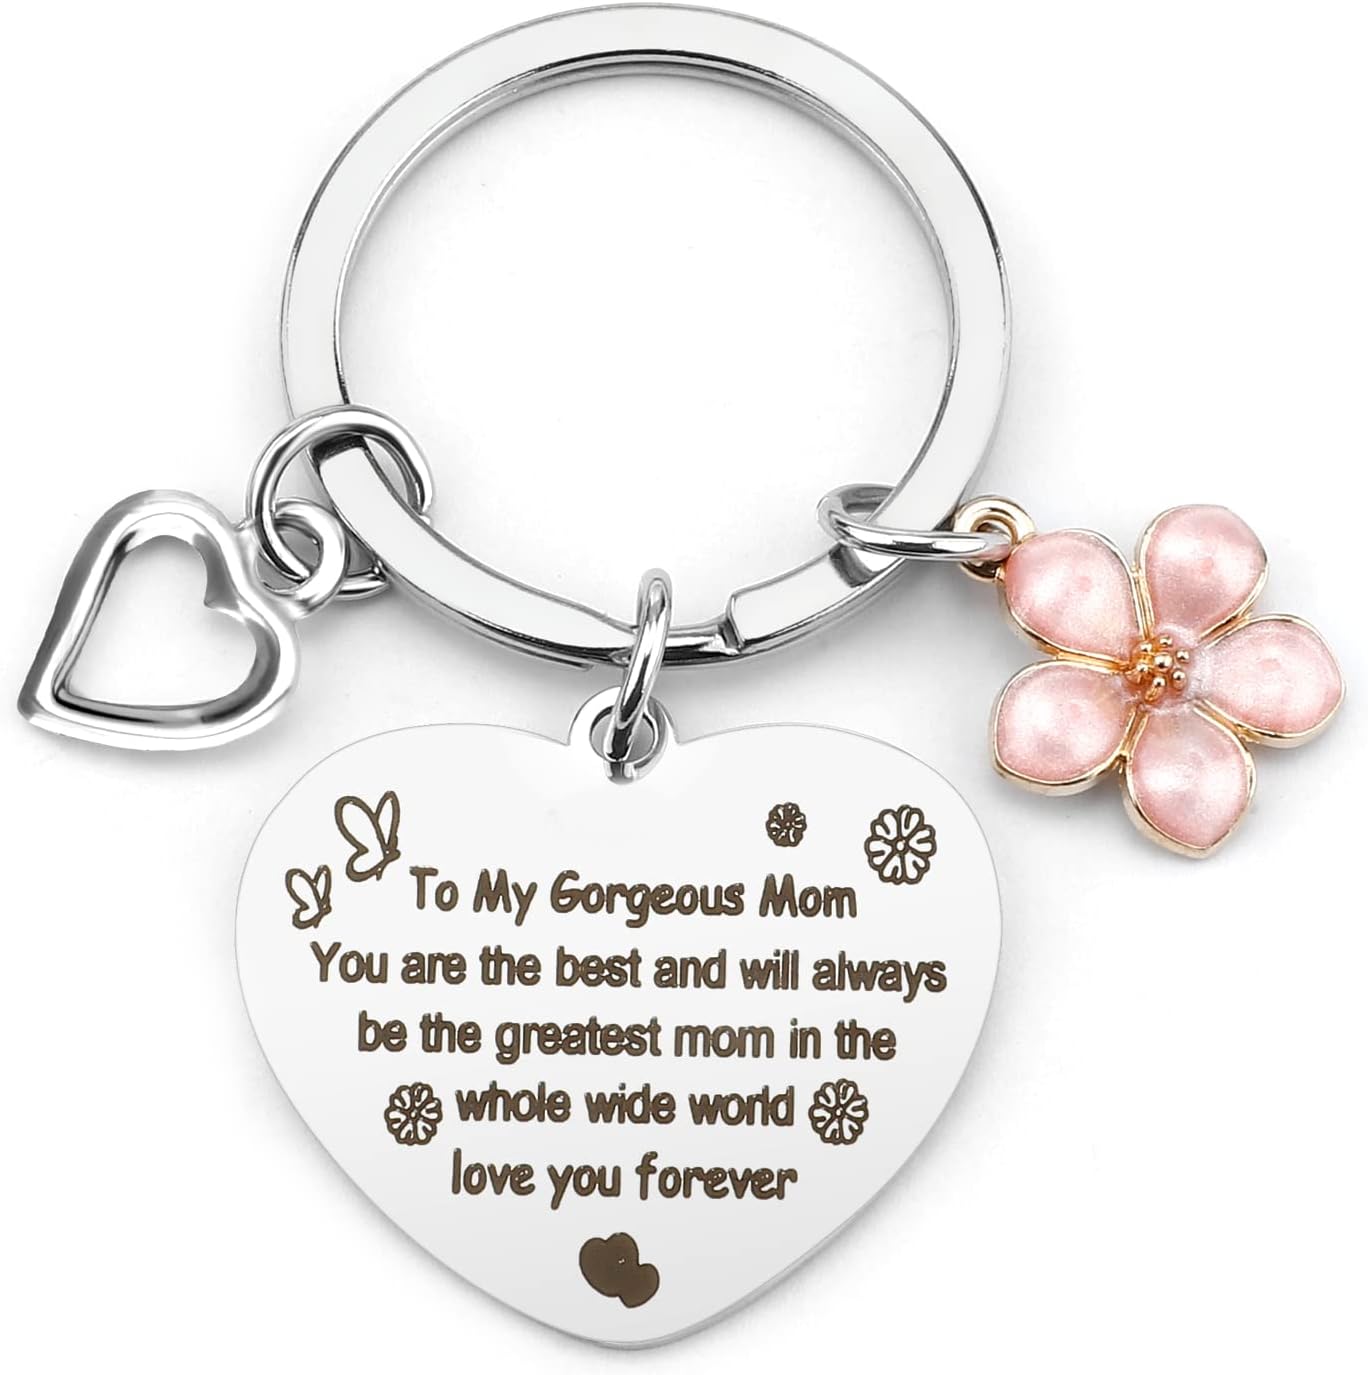 Mom Silver 6 Mothers Day Gifts from Son Daughter, Mom Keychain Mother'S Day Presents for Mom Christmas Birthday Thank You Gift